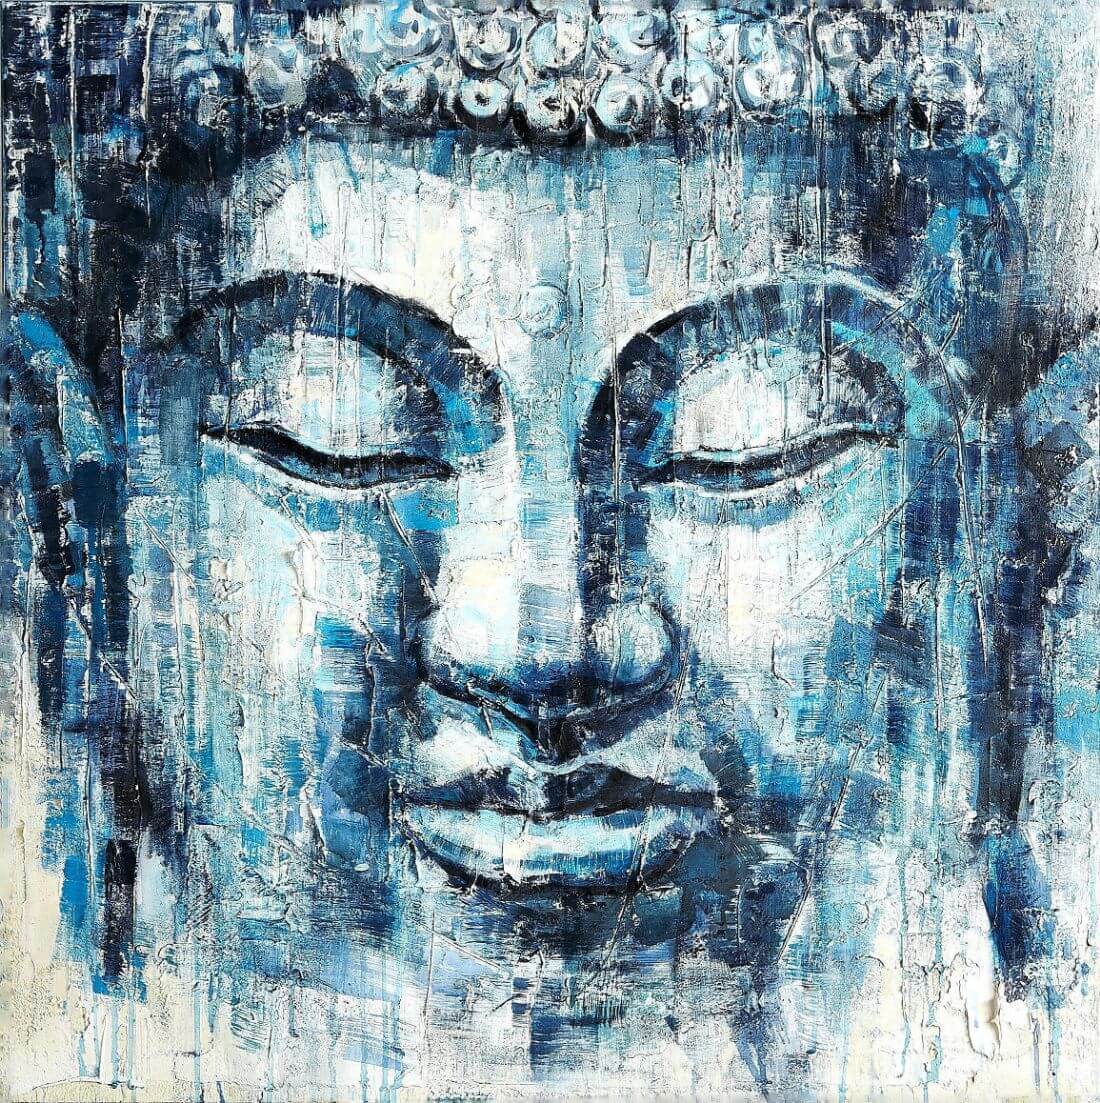 Blue Buddha Art Painting - Posters by Anzai | Buy Posters, Frames ...